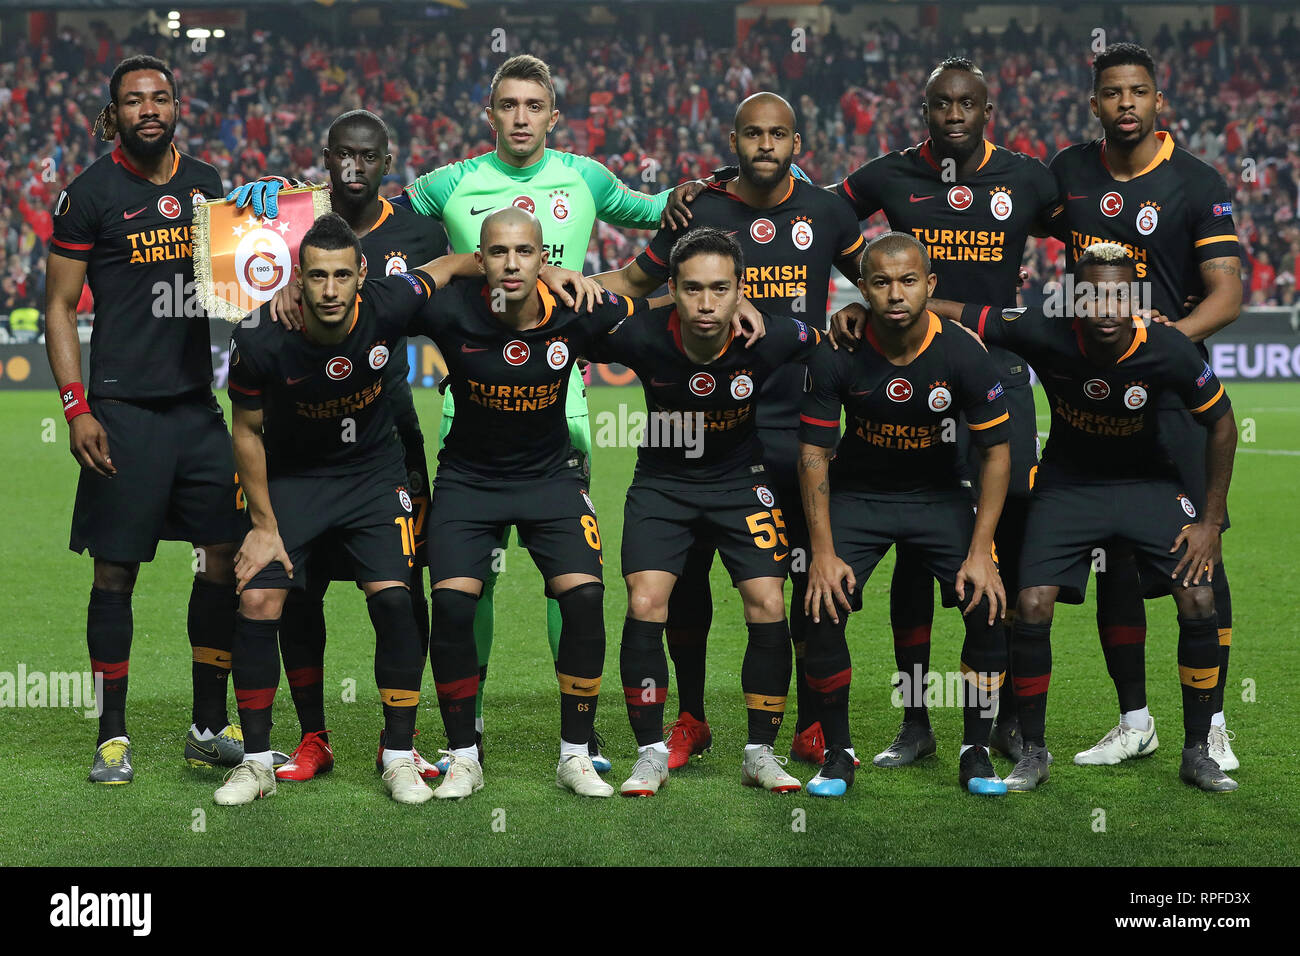 Lineup of the Galatasaray AS team during the Europa League 2018/2019 footballl match between SL Benfica vs Galatasaray AS.  (Final score: SL Benfica 0 - 0 Galatasaray AS) Stock Photo